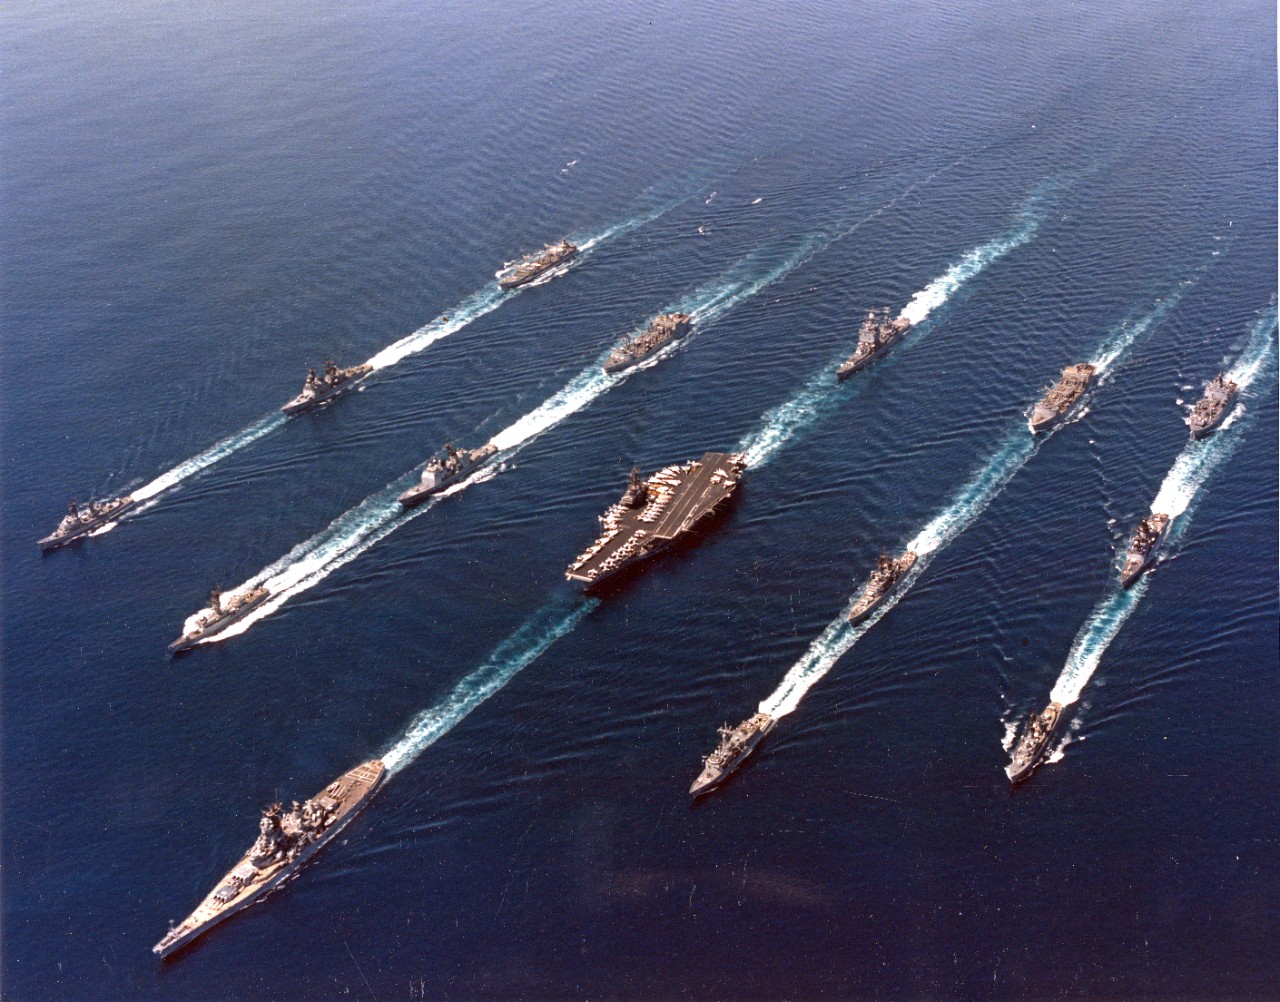 An Iowa class battleship leads a battle group at sea in the 1980s.